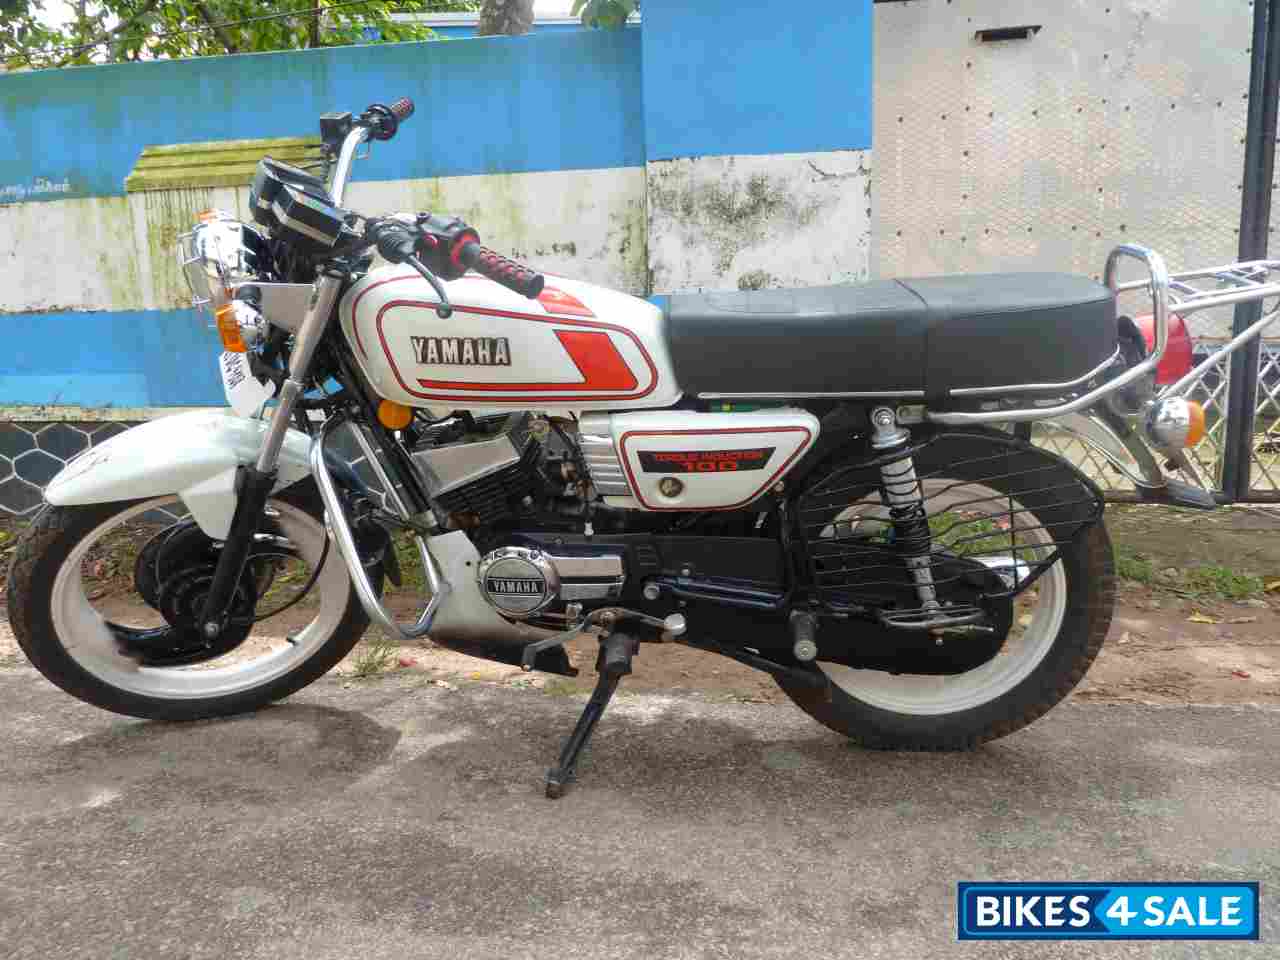 Used 1992 Model Yamaha Rx 100 For Sale In Kollam Id 61232 Pearl